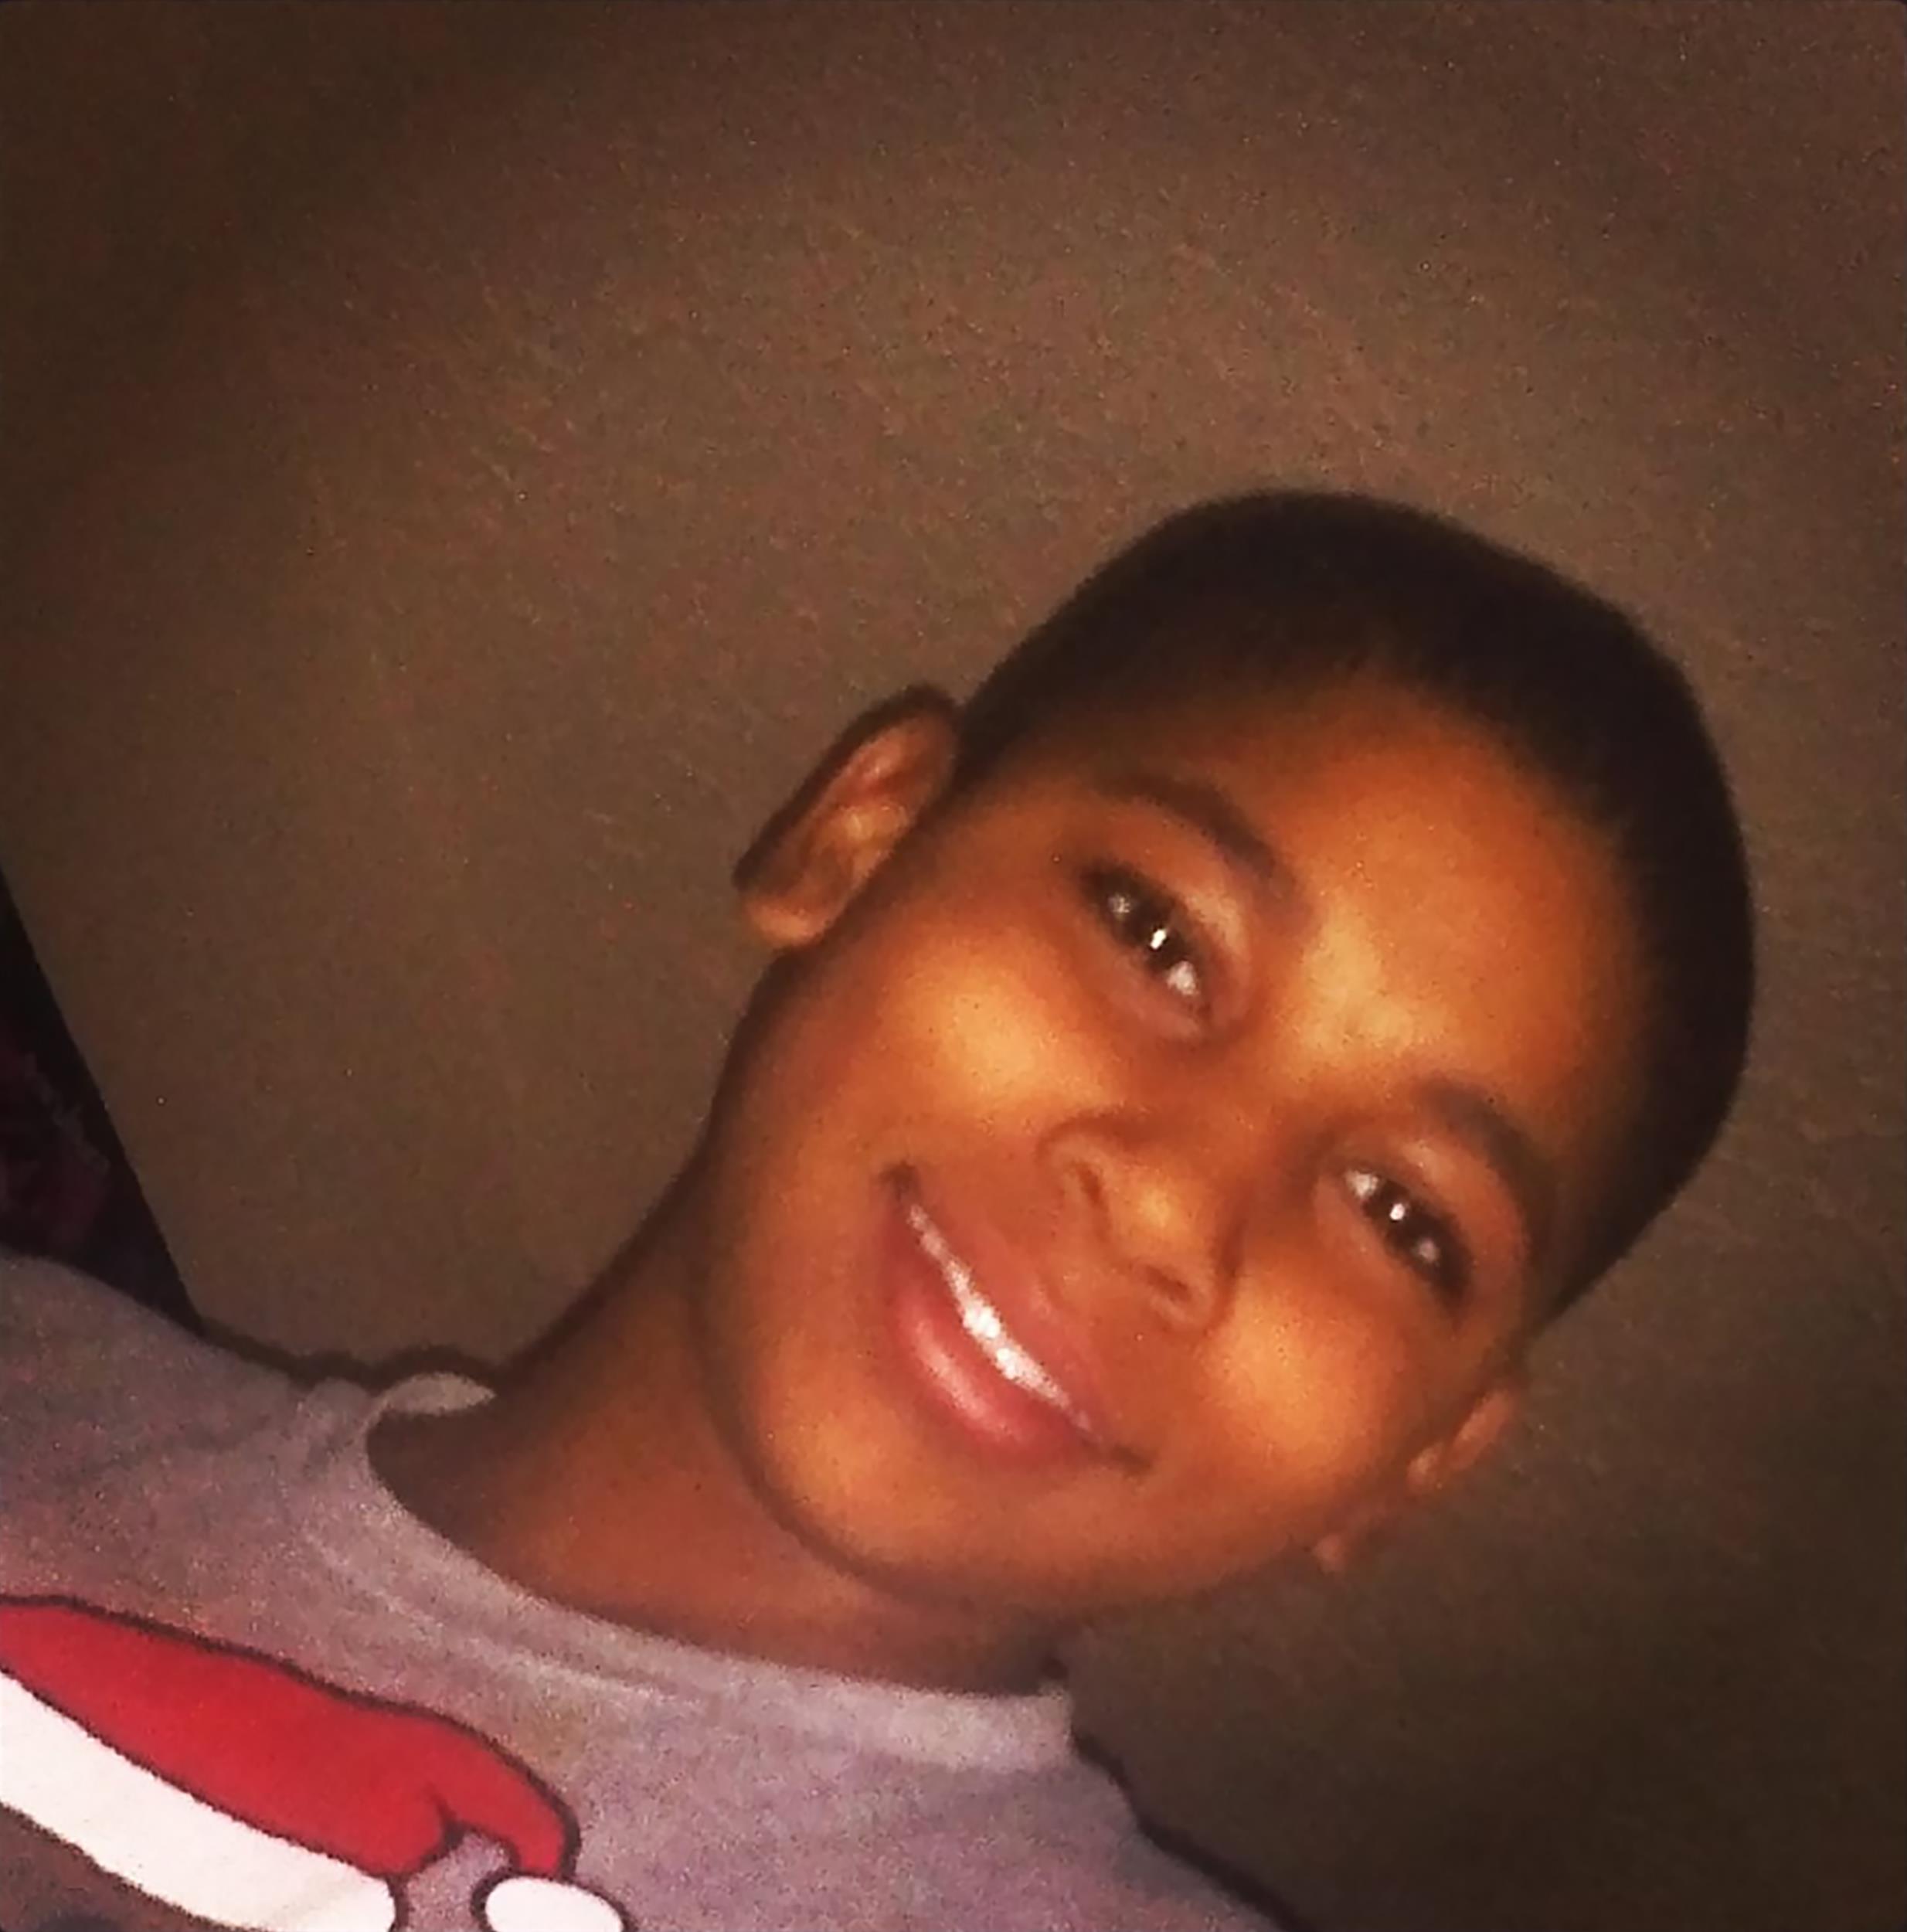 Tamir Rice : 12-Year-old Shot & Killed By Police, Never Had A Chance